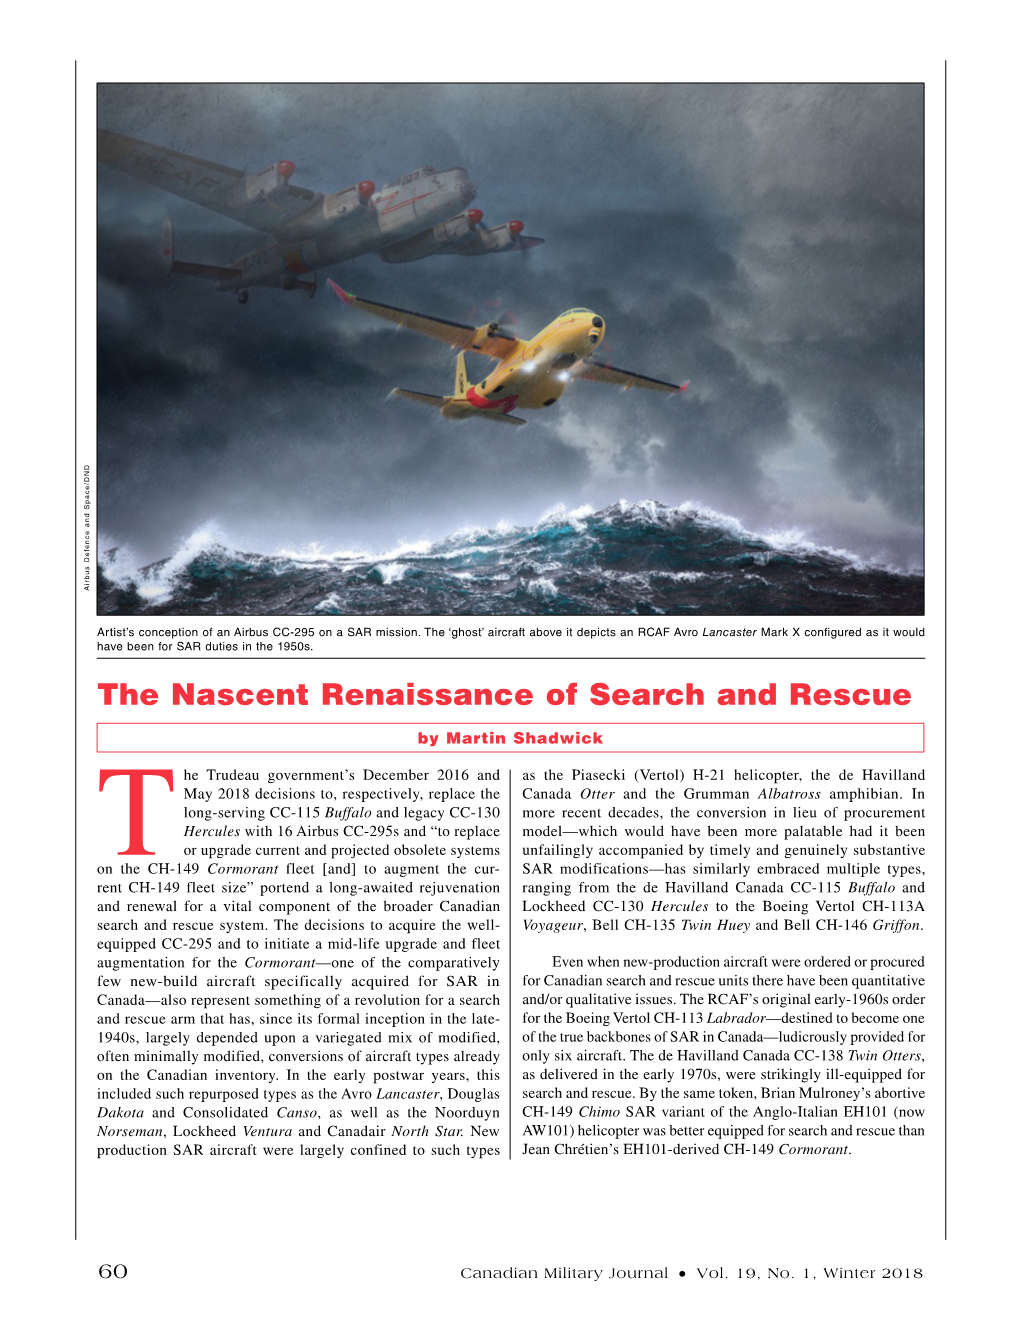 The Nascent Renaissance of Search and Rescue